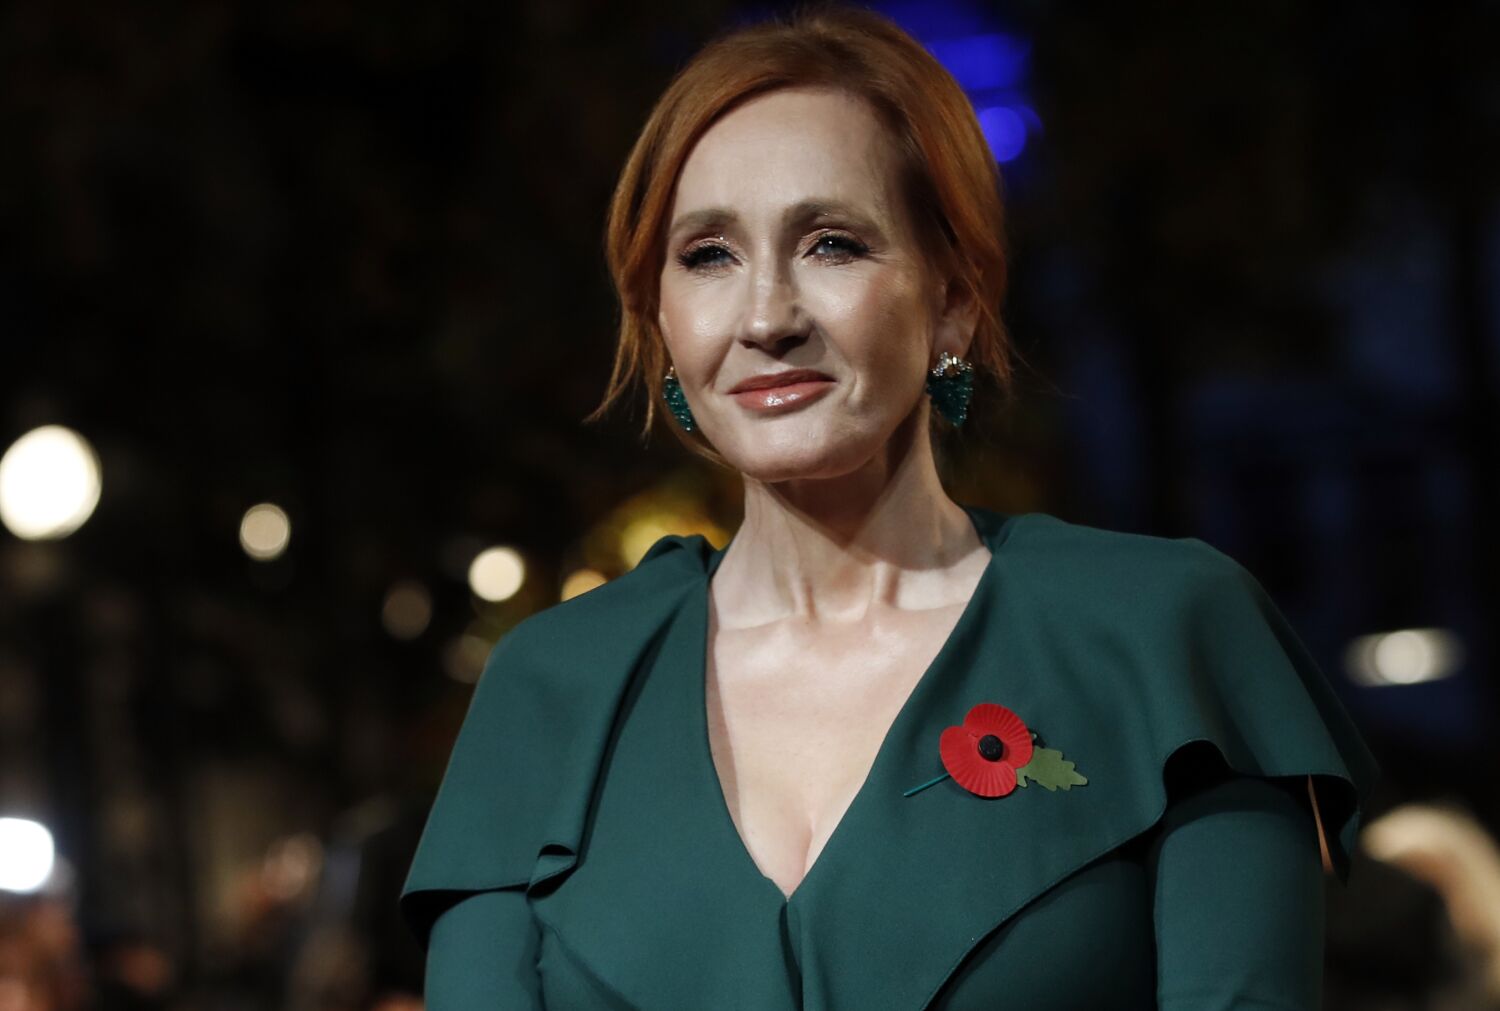 BBC apologizes for 'unchallenged claims' about J.K. Rowling for the second time this month